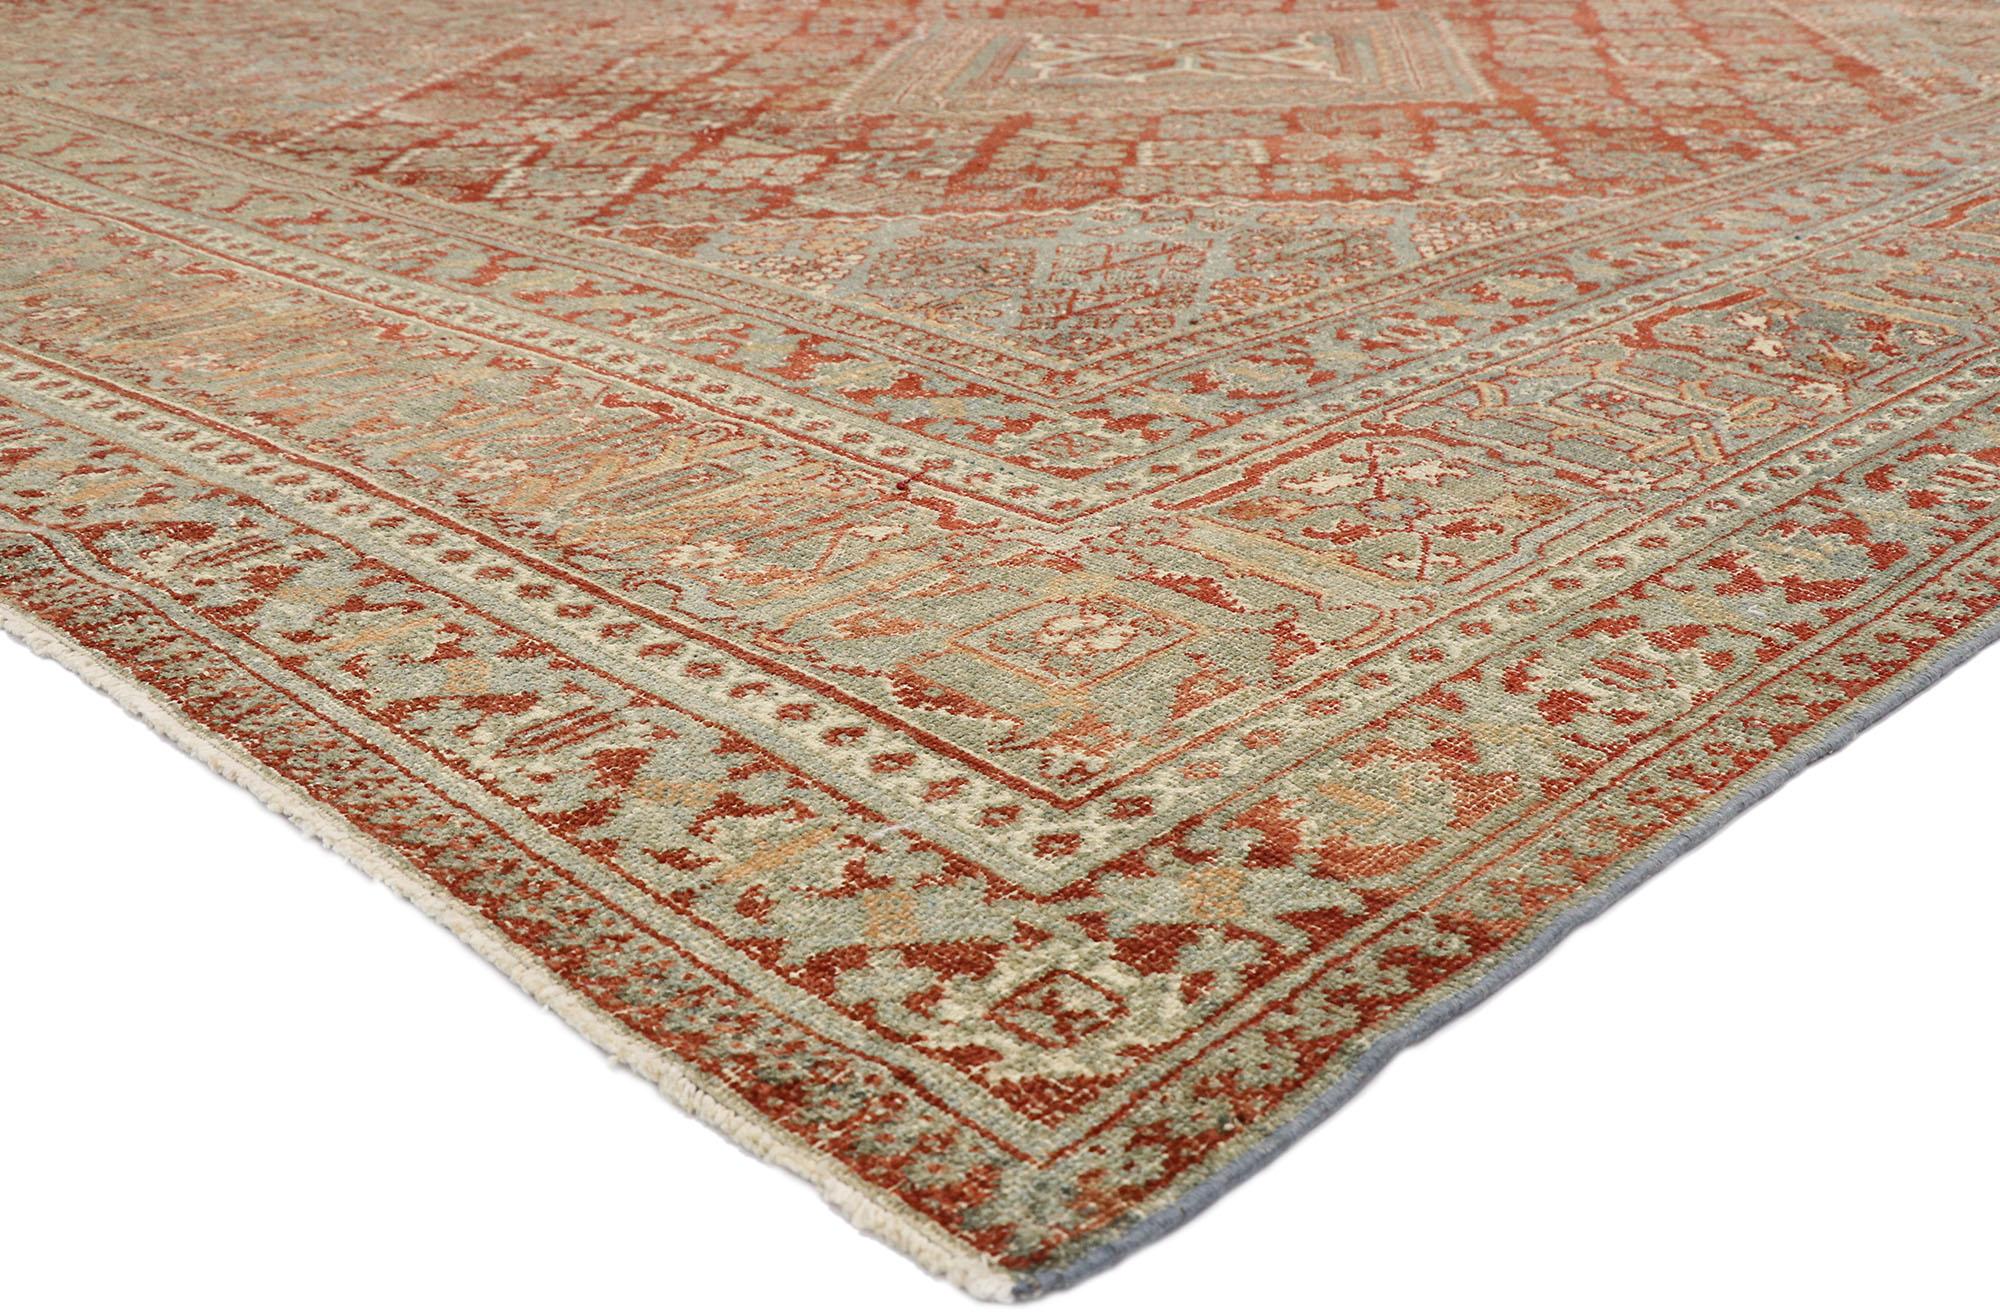 52632, Distressed Antique Persian Joshegan Design Rug with Relaxed Rustic Federal Style 10'07 x 13'03. Federal style and made in Turkey, this hand knotted wool distressed antique Persian Joshegan design rug is well-balanced and poised to impress. It